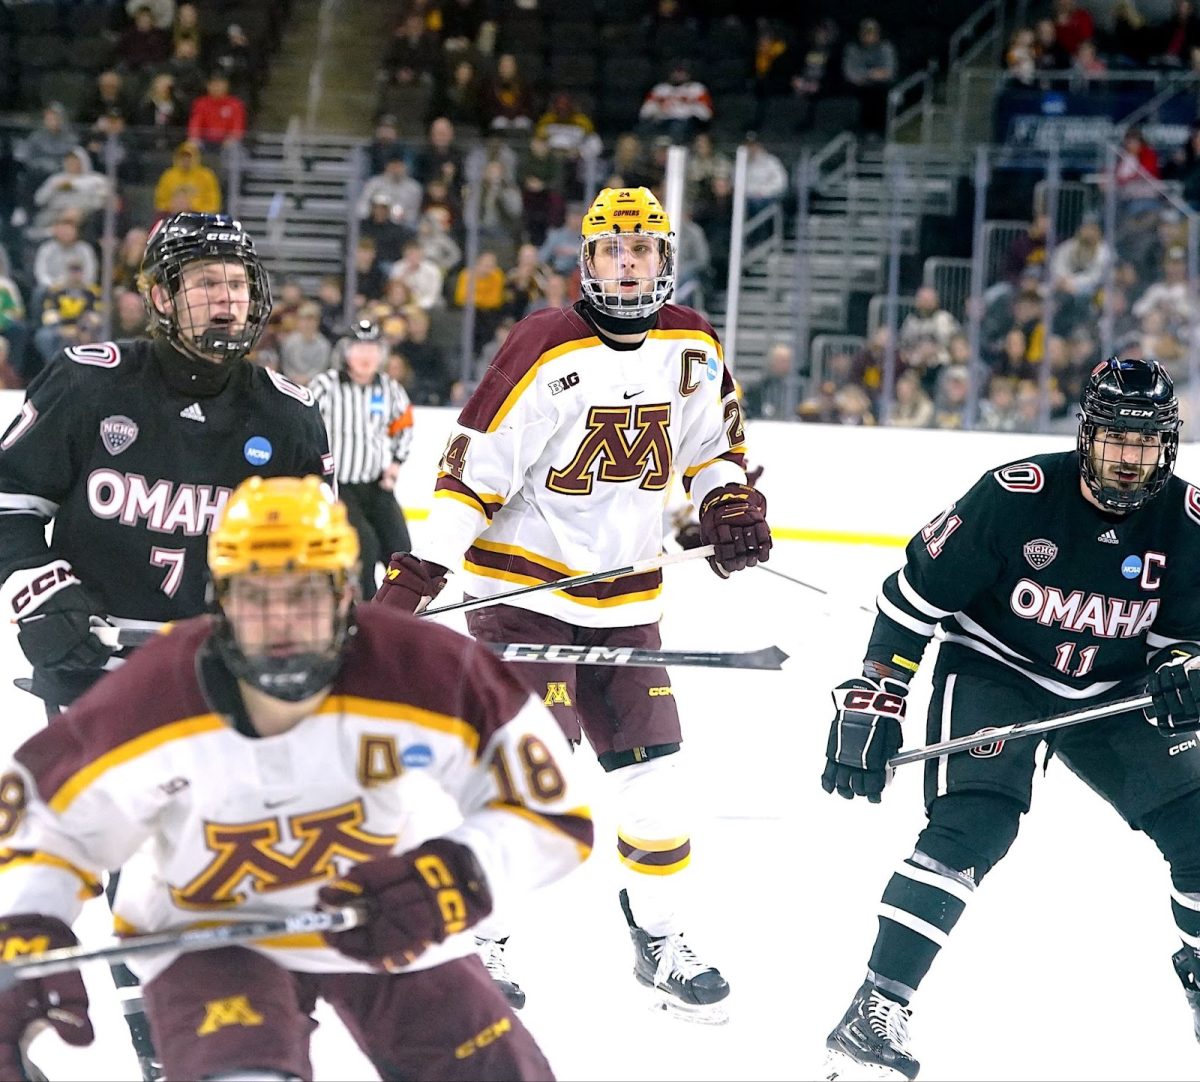 The+Gophers+will+face+off+against+Boston+University+on+Saturday+after+their+win+over+the+Mavericks.